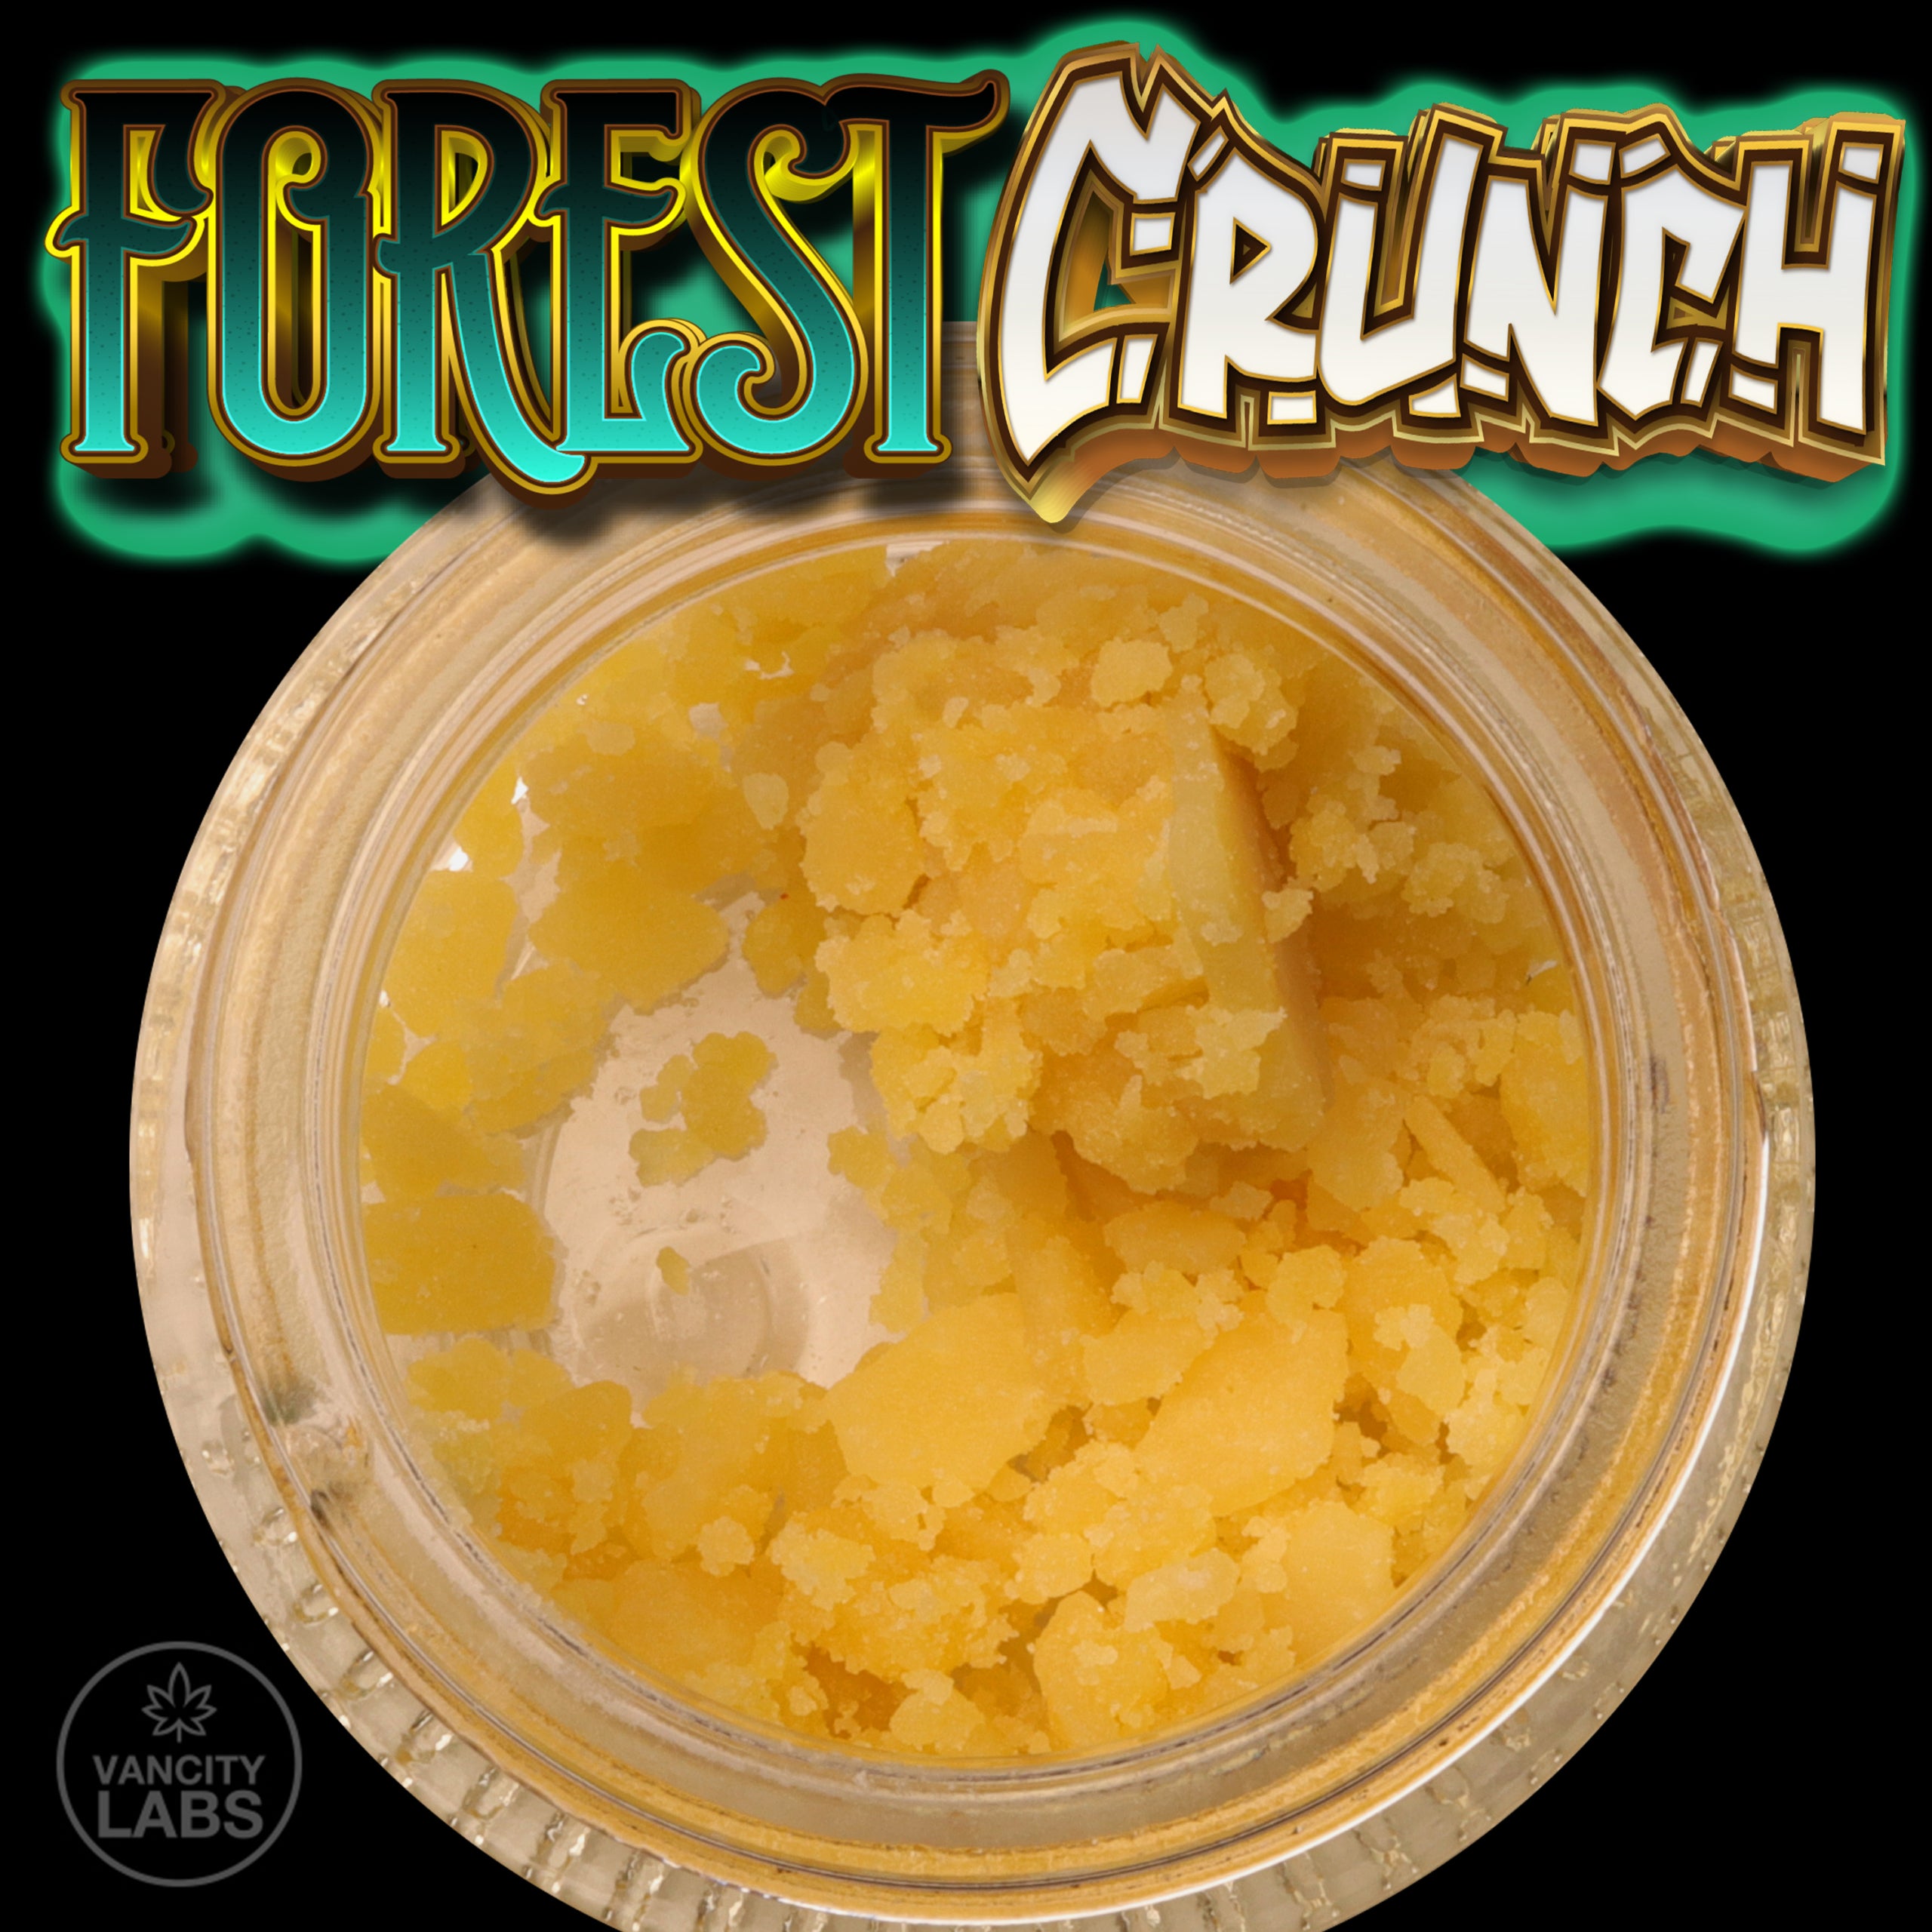 Forest Crunch VCL Extract